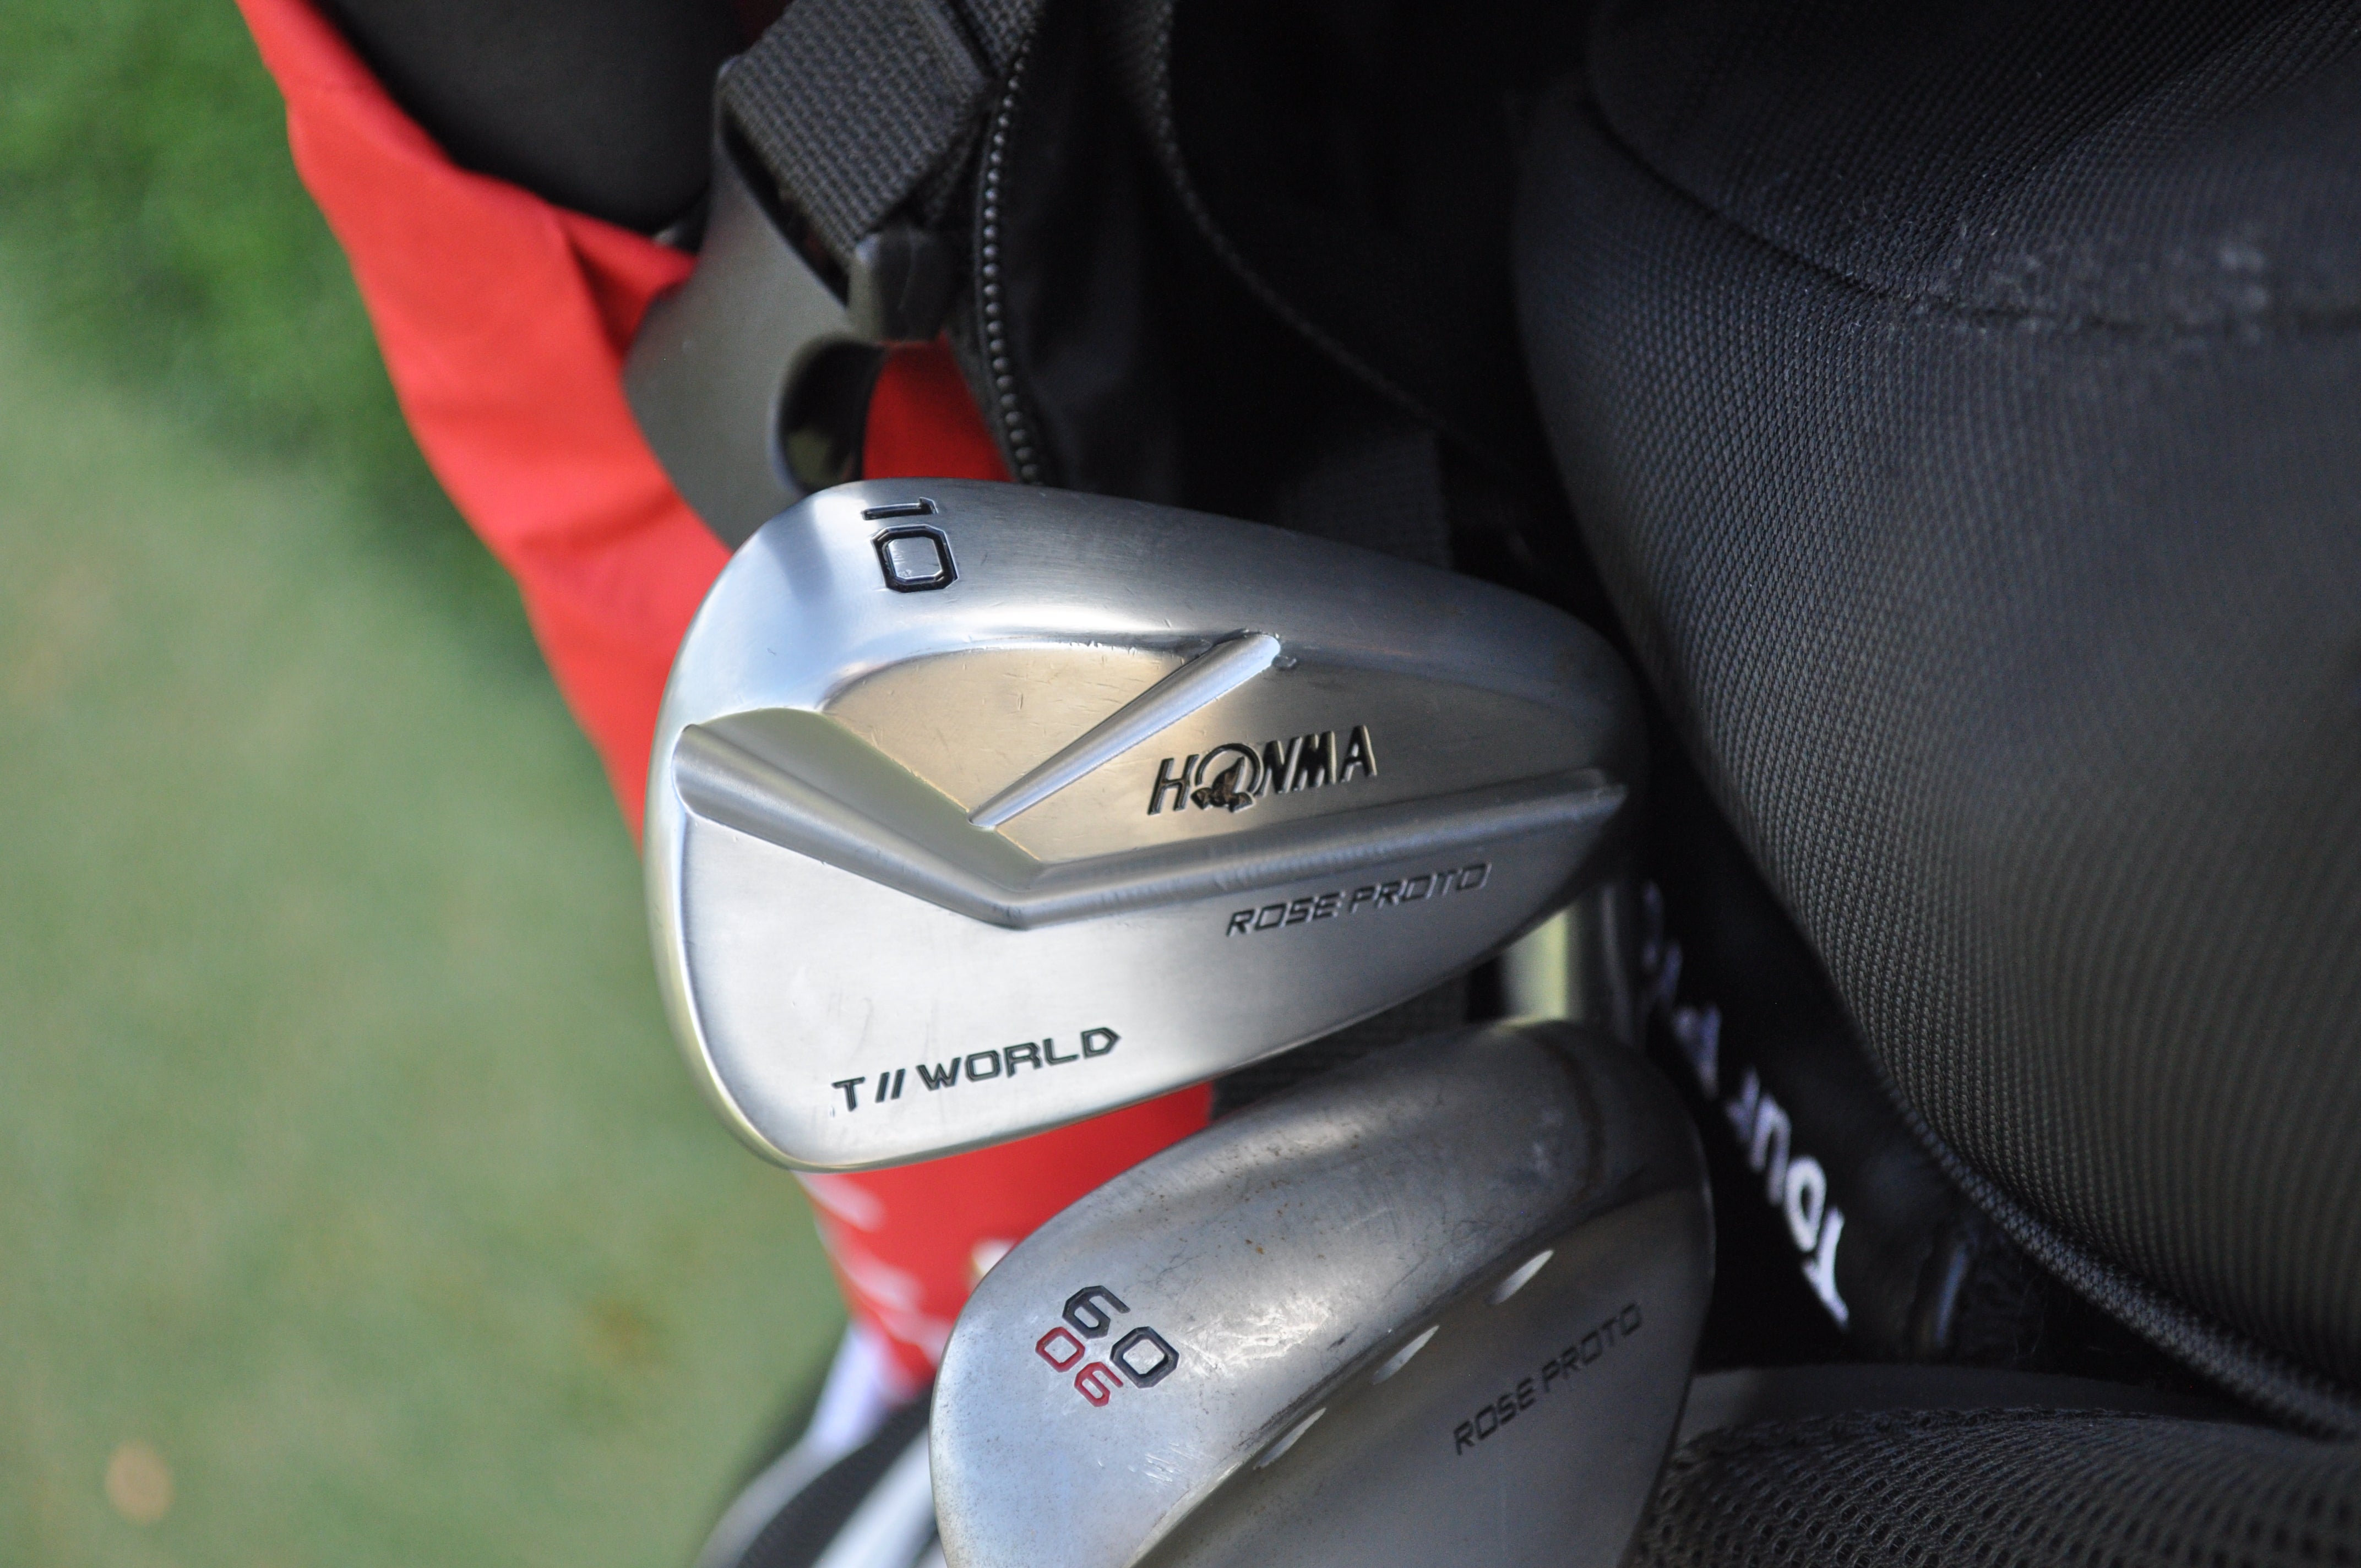 Give me the "10 iron." Justin Rose's Honma Rose Proto irons are a bit unconventional with a "10" marked on the sole instead of "PW."